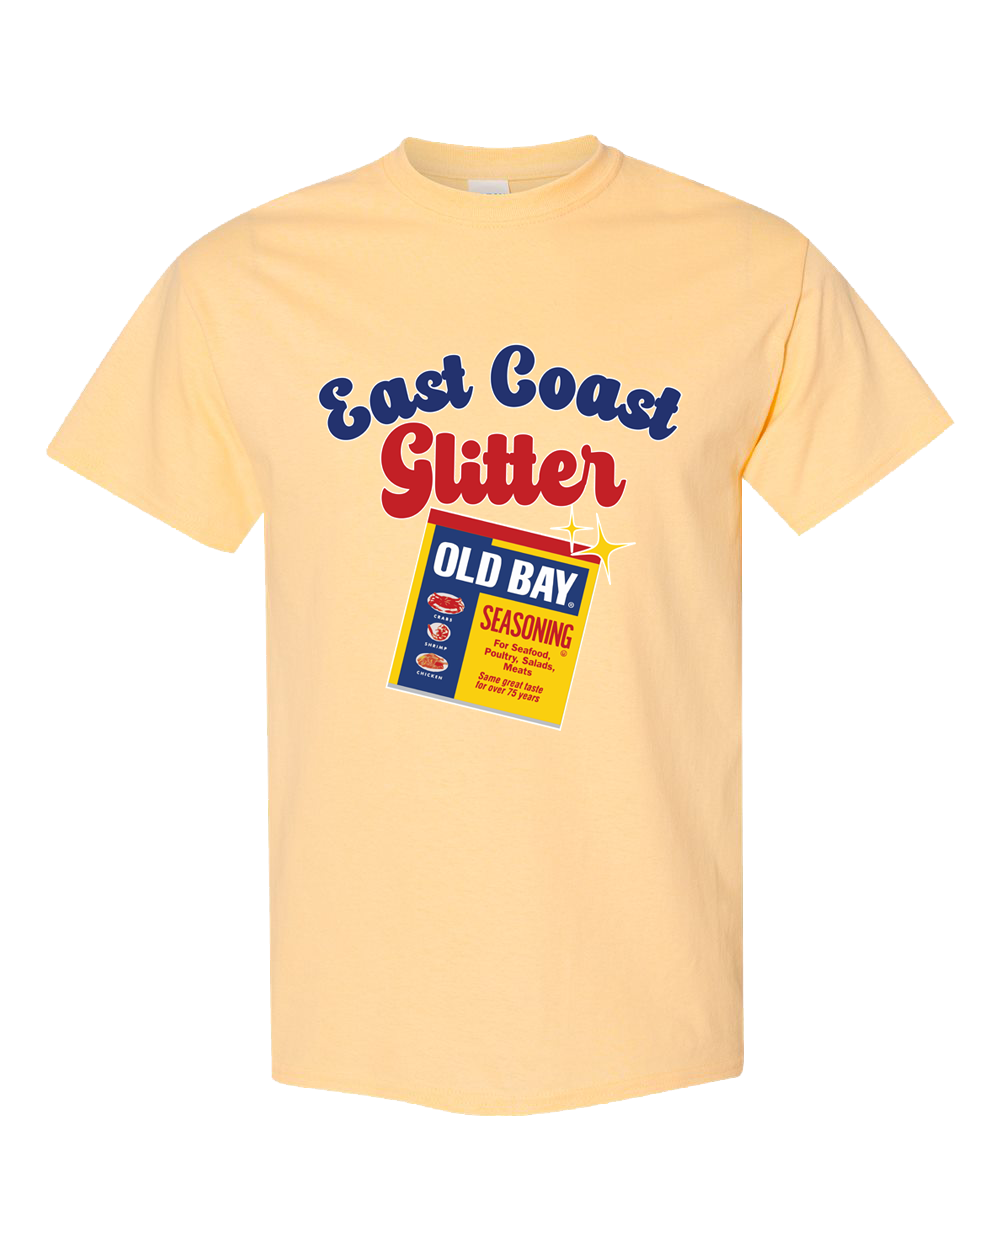 *PRE-ORDER* OLD BAY East Coast Glitter (Yellow Haze) / Shirt (Estimated Ship Date 9/20) - Route One Apparel